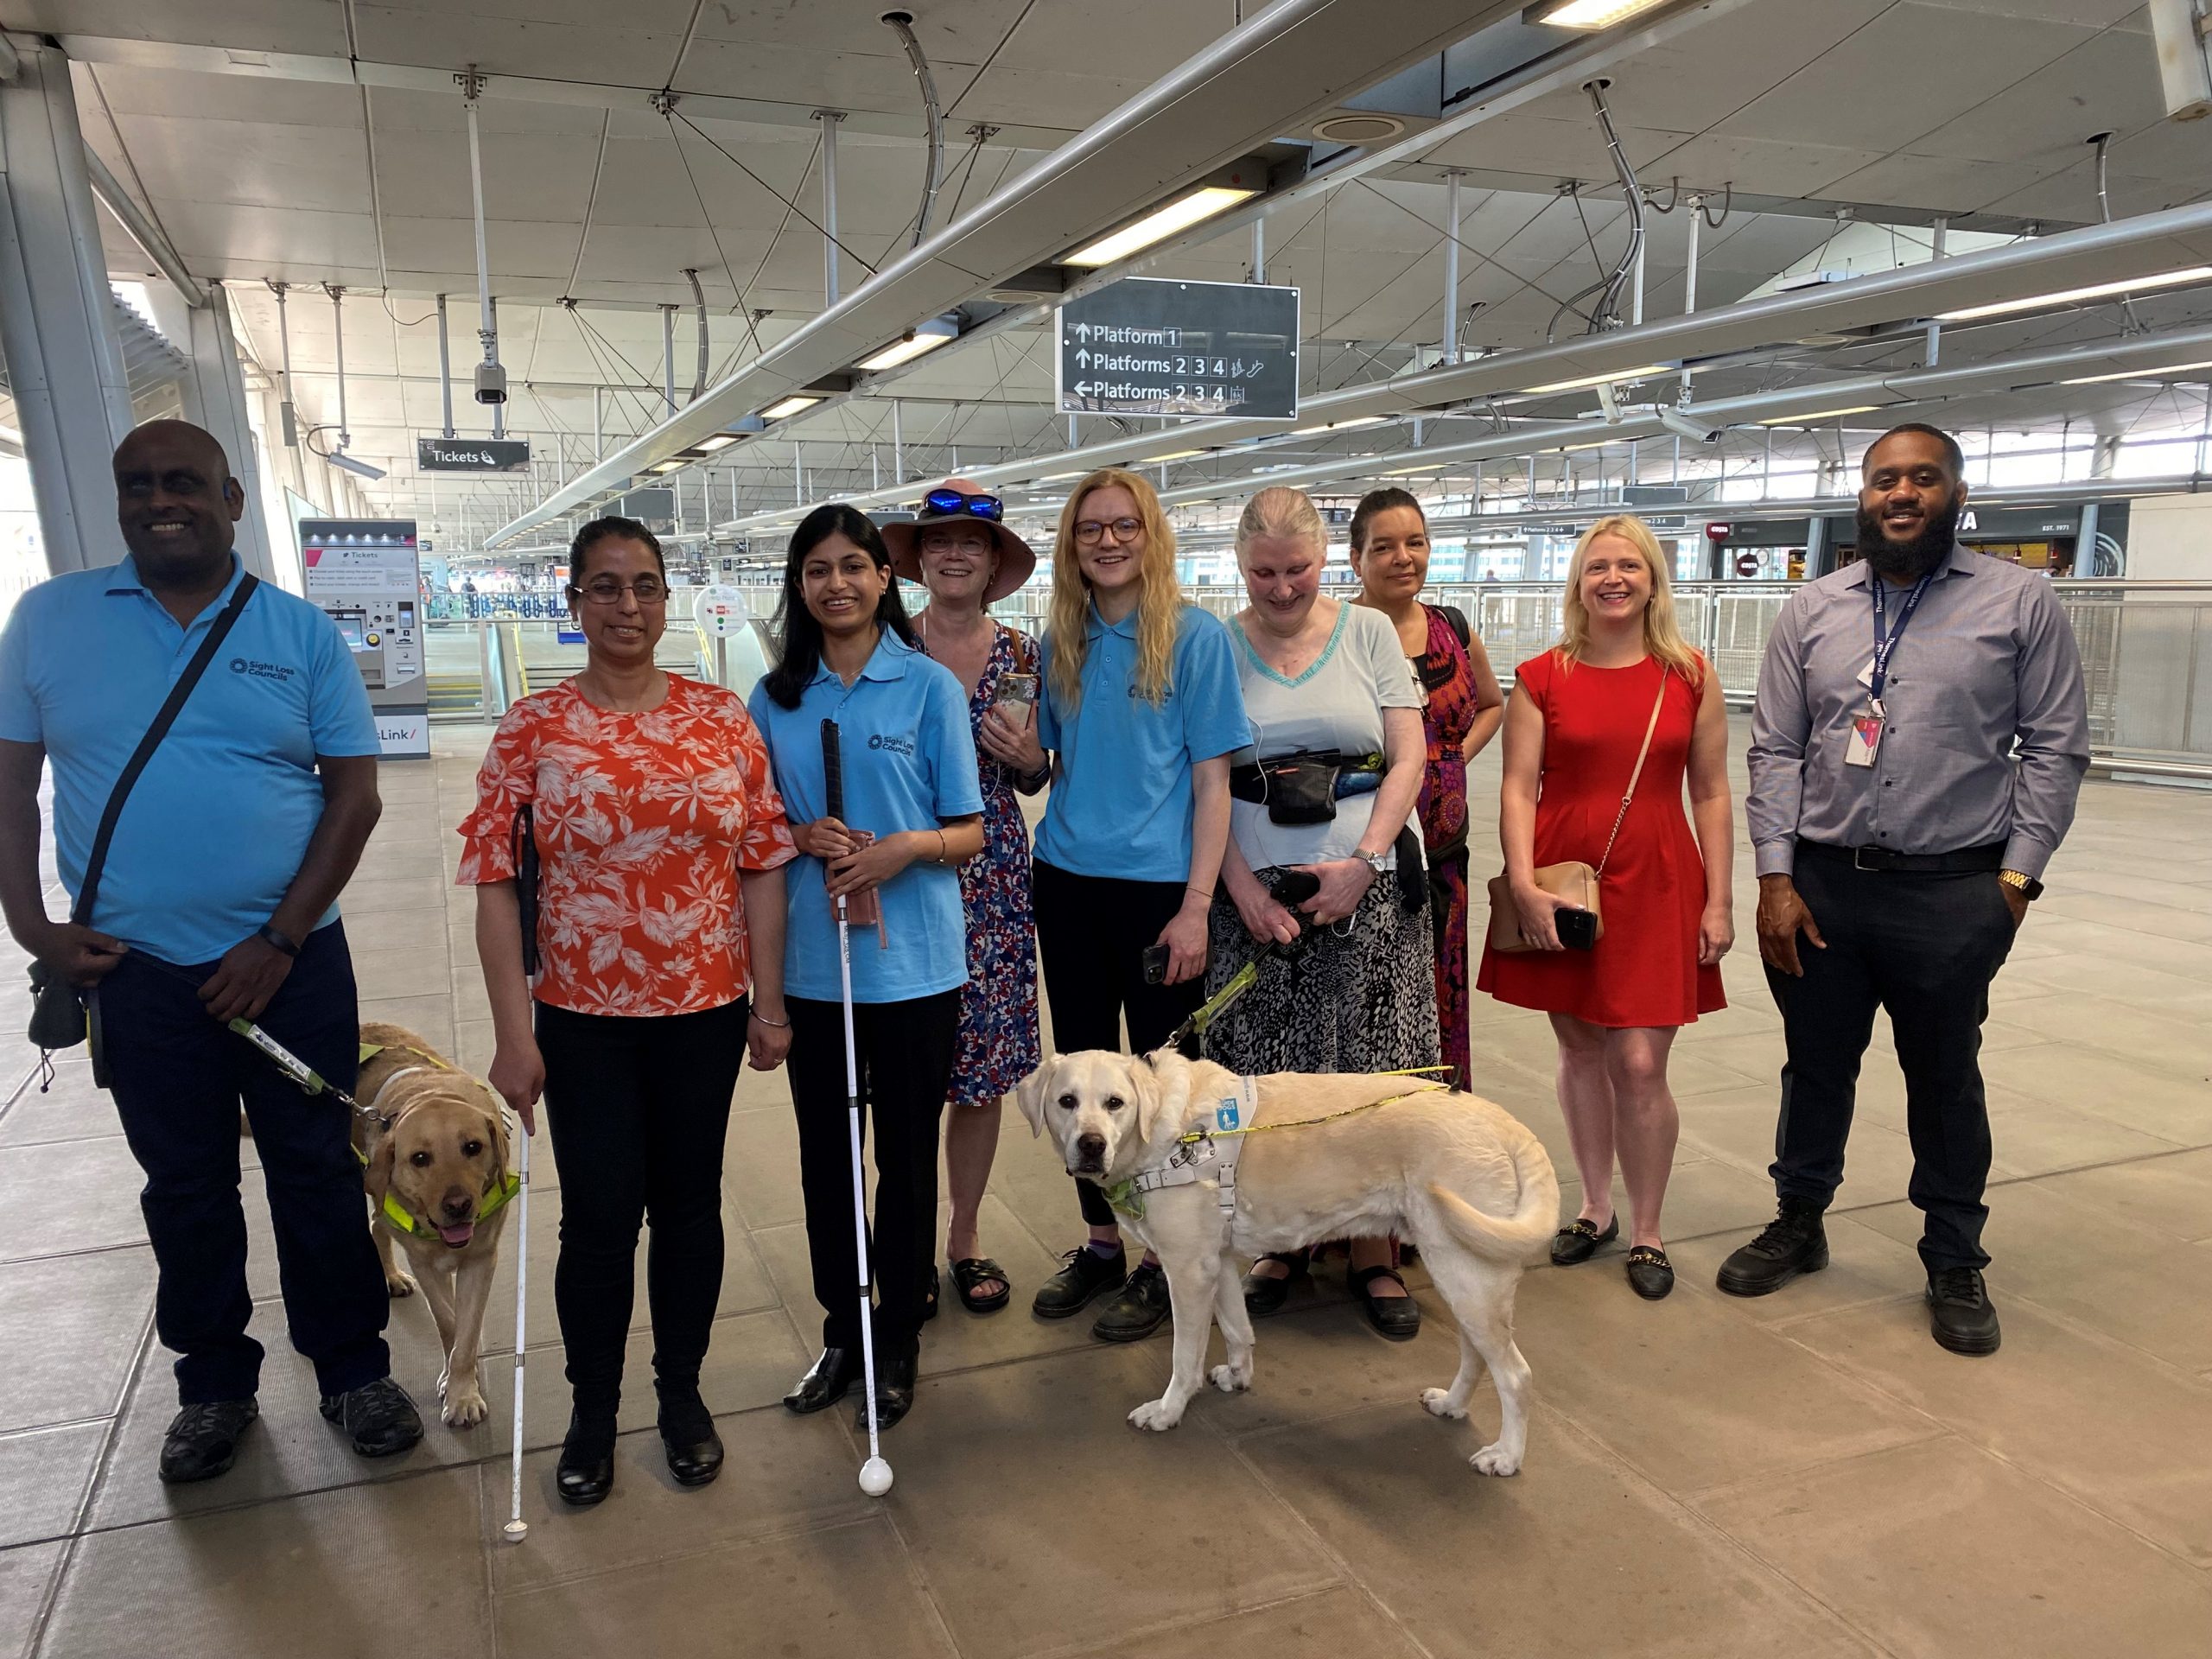 Members of London and SW London SLCs standing in the concourse by the platforms at London Blackfriars. From left to right: Haren, Amrit, Vidya, Vicky, Engagement Manager, Lucy Williams, SLC member Mary, Denise, Sophie, Accessibility Improvement Manager for GTR, and the Blackfriars Station Manager.